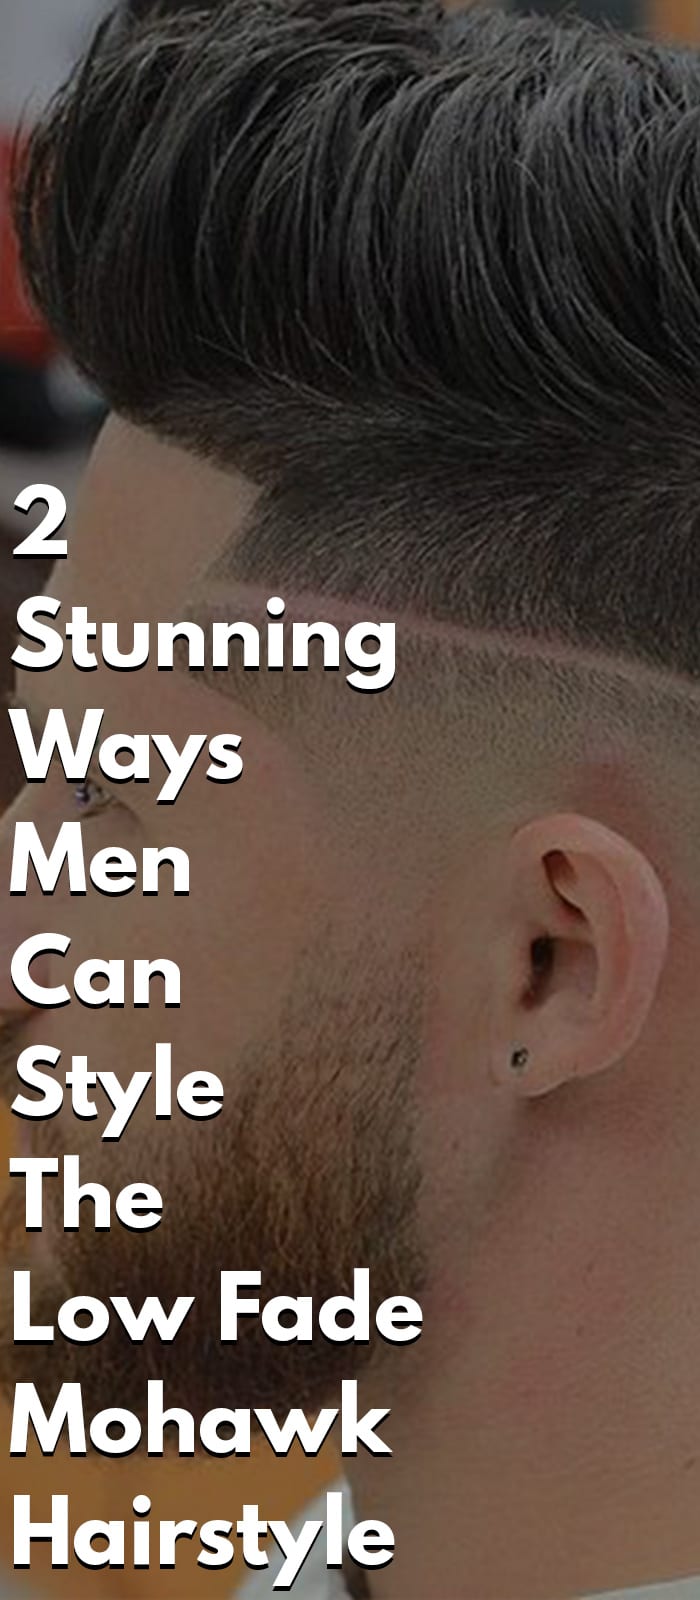 2 Stunning Ways Men Can Style The Low Fade Mohawk Hairstyle